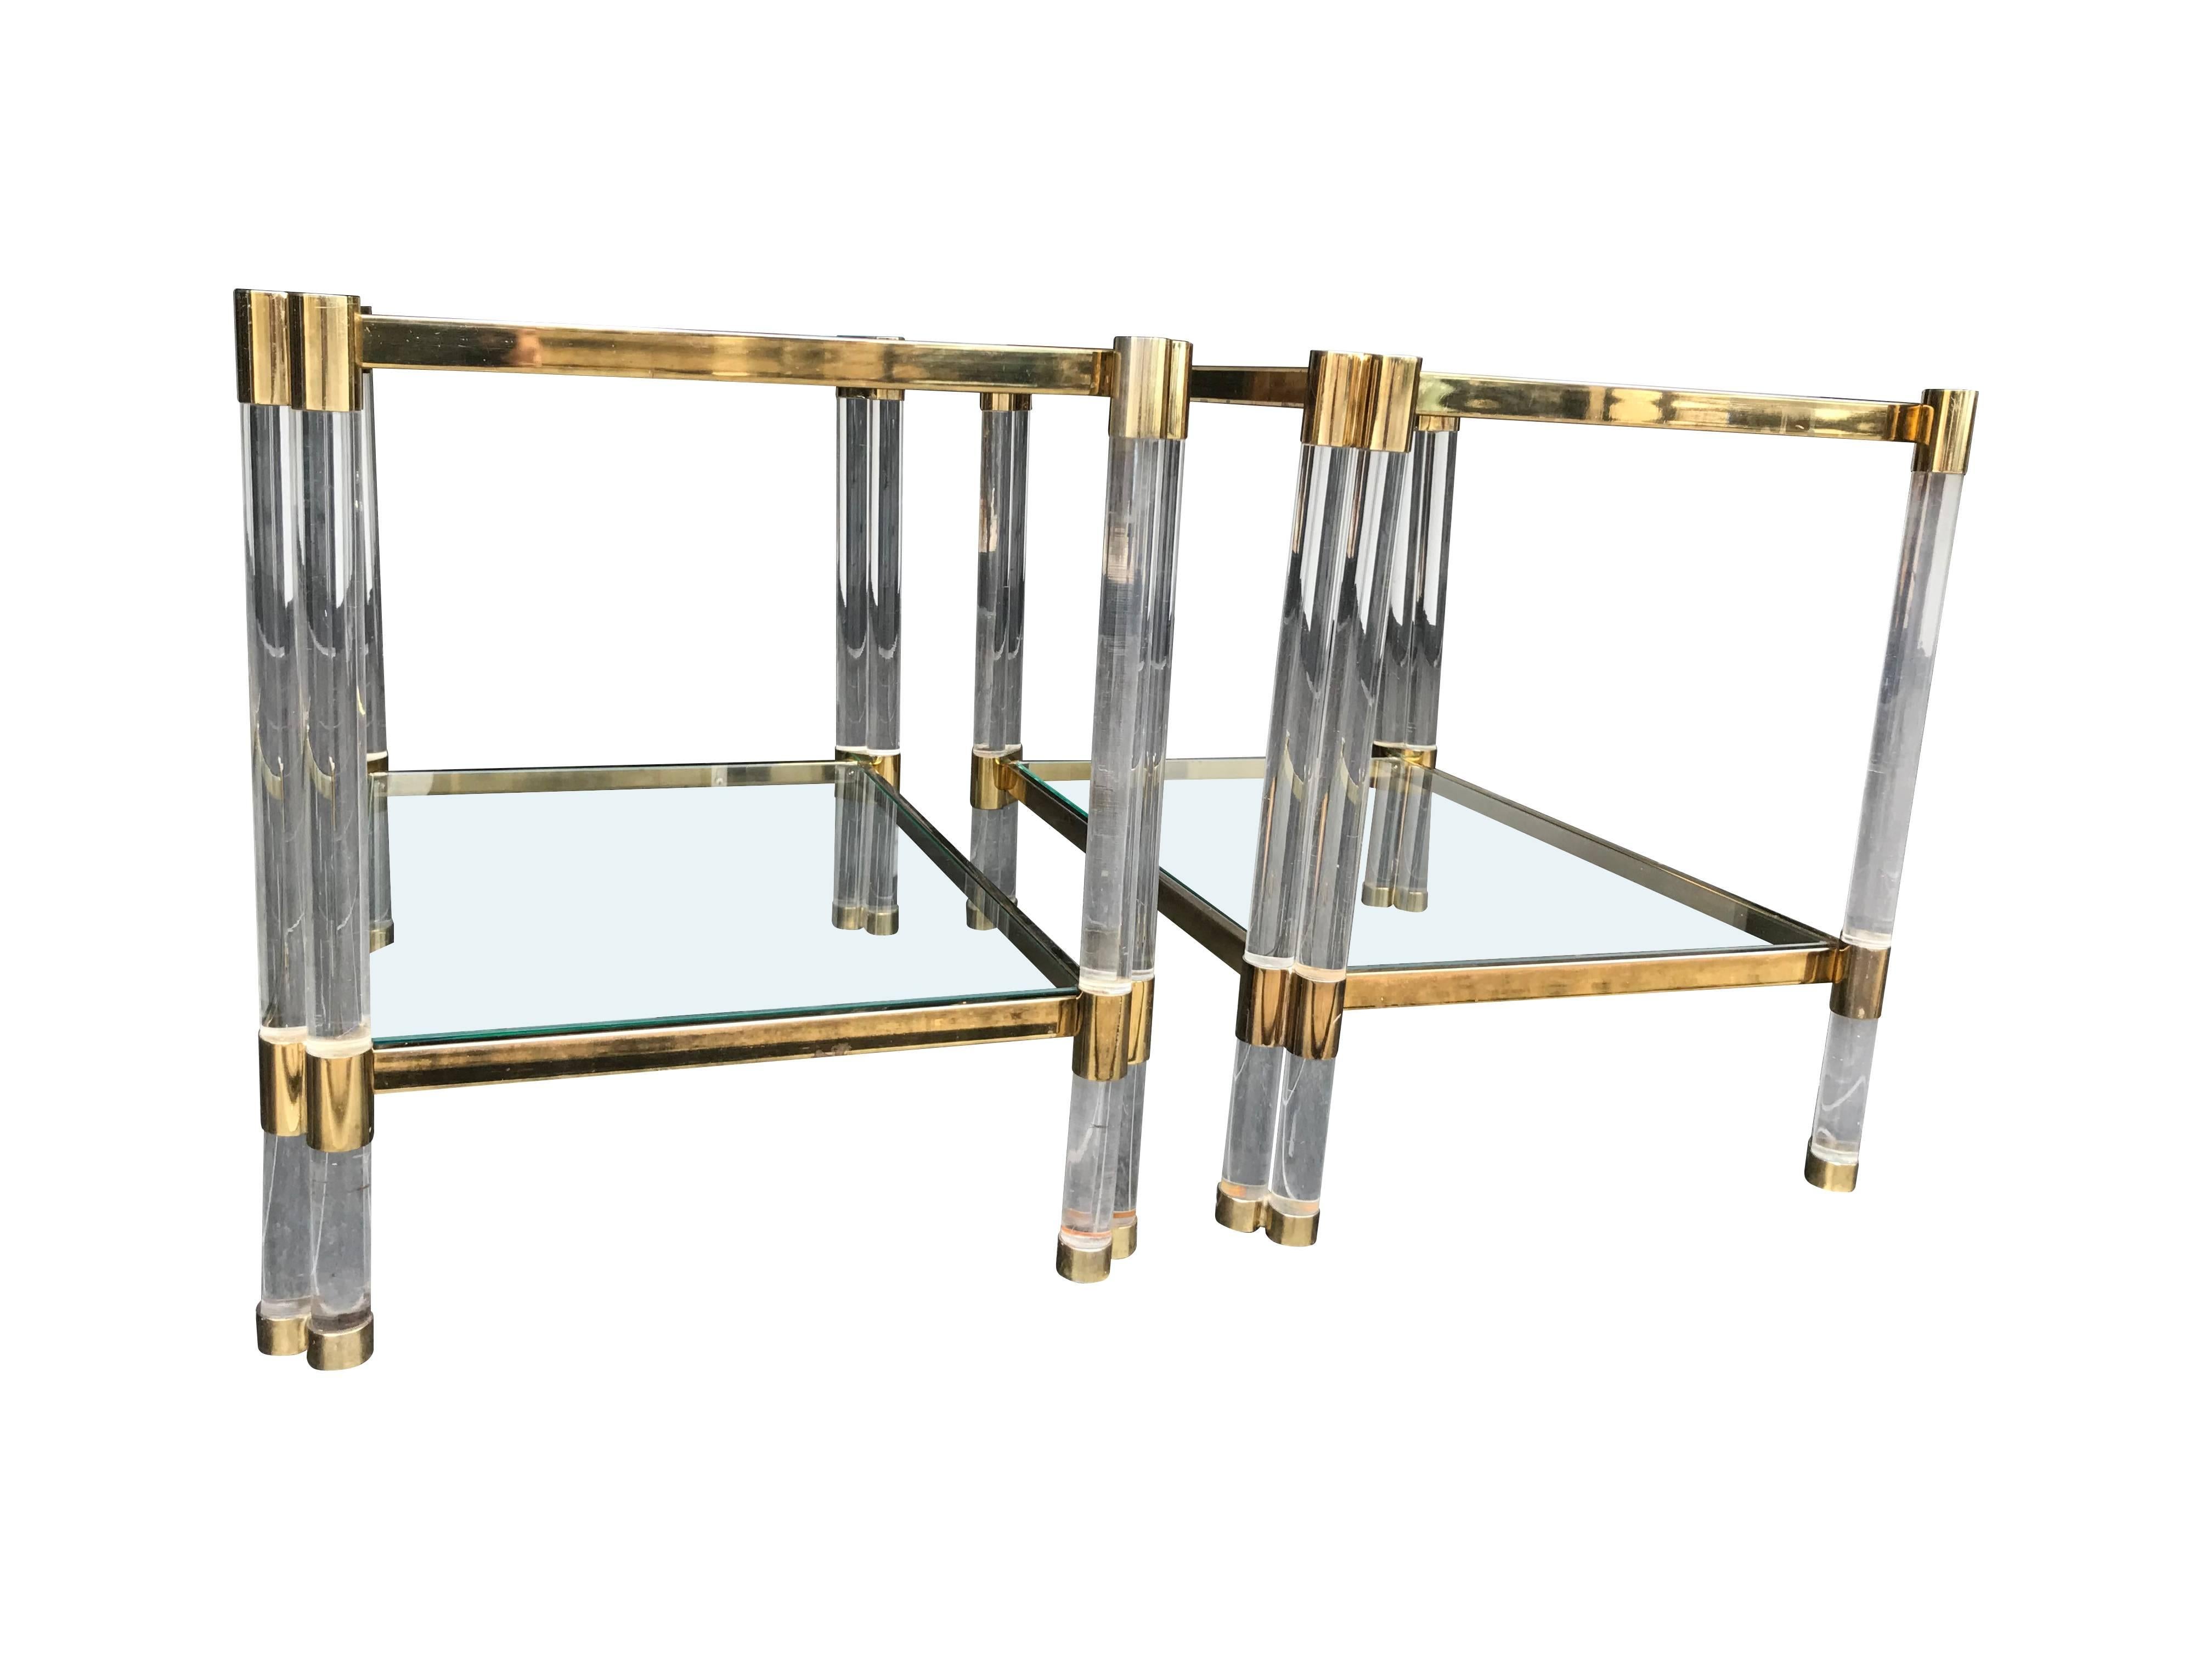 A pair of Art Deco style Lucite and gilt metal side tables, each with two tubes of Lucite on each leg, two glass shelves and gilt metal frame.